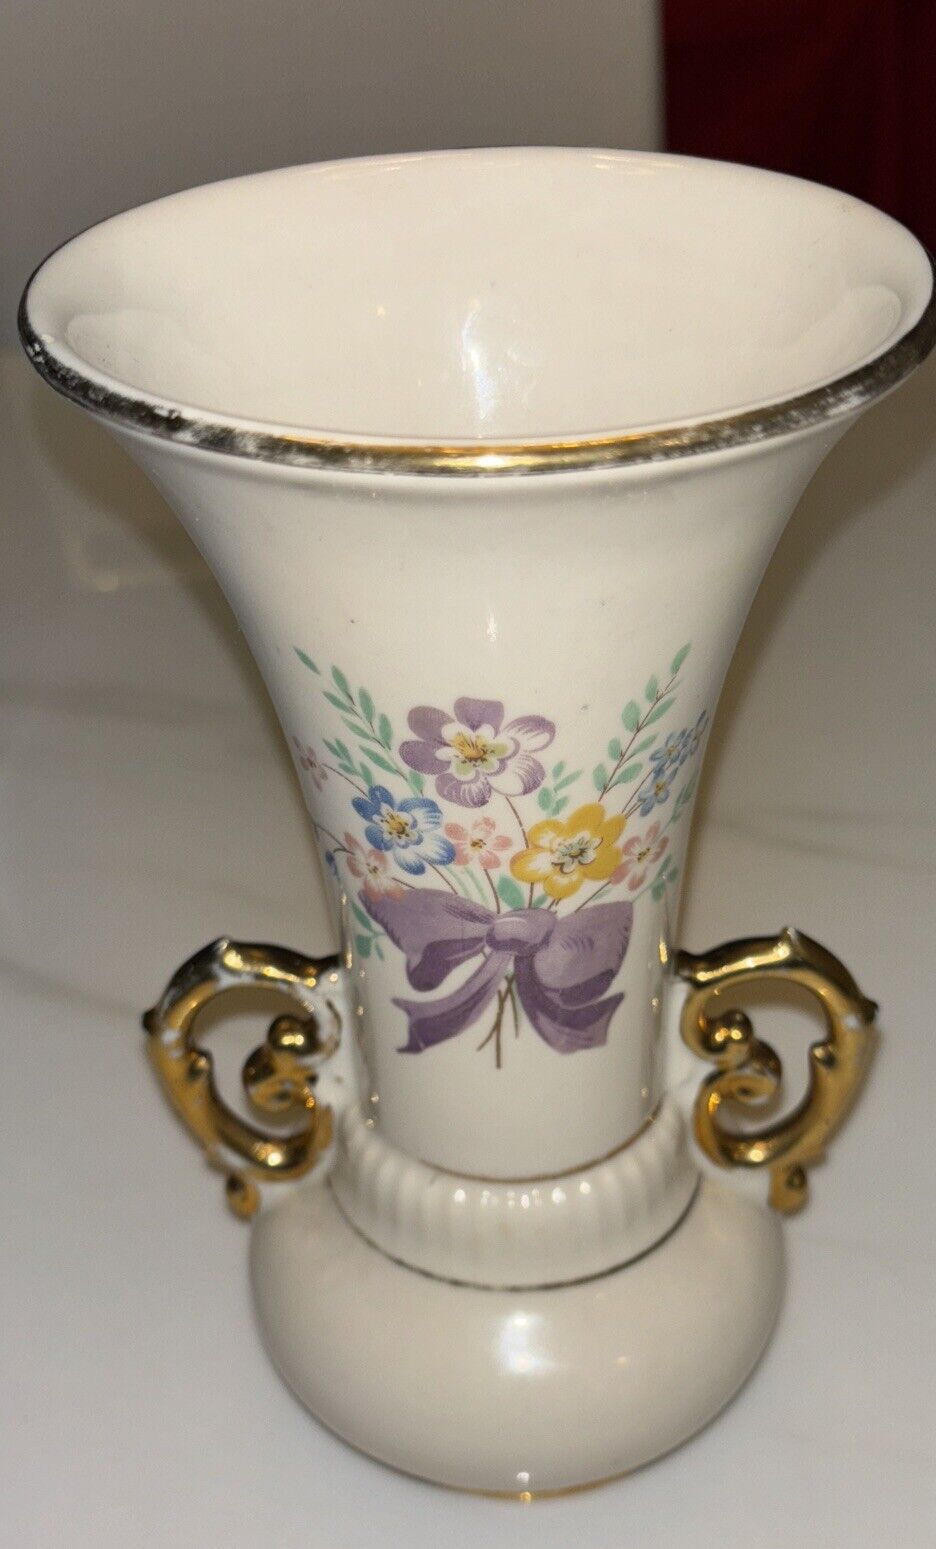 Vintage Vase White Floral with Handles Abingdon USA Pottery